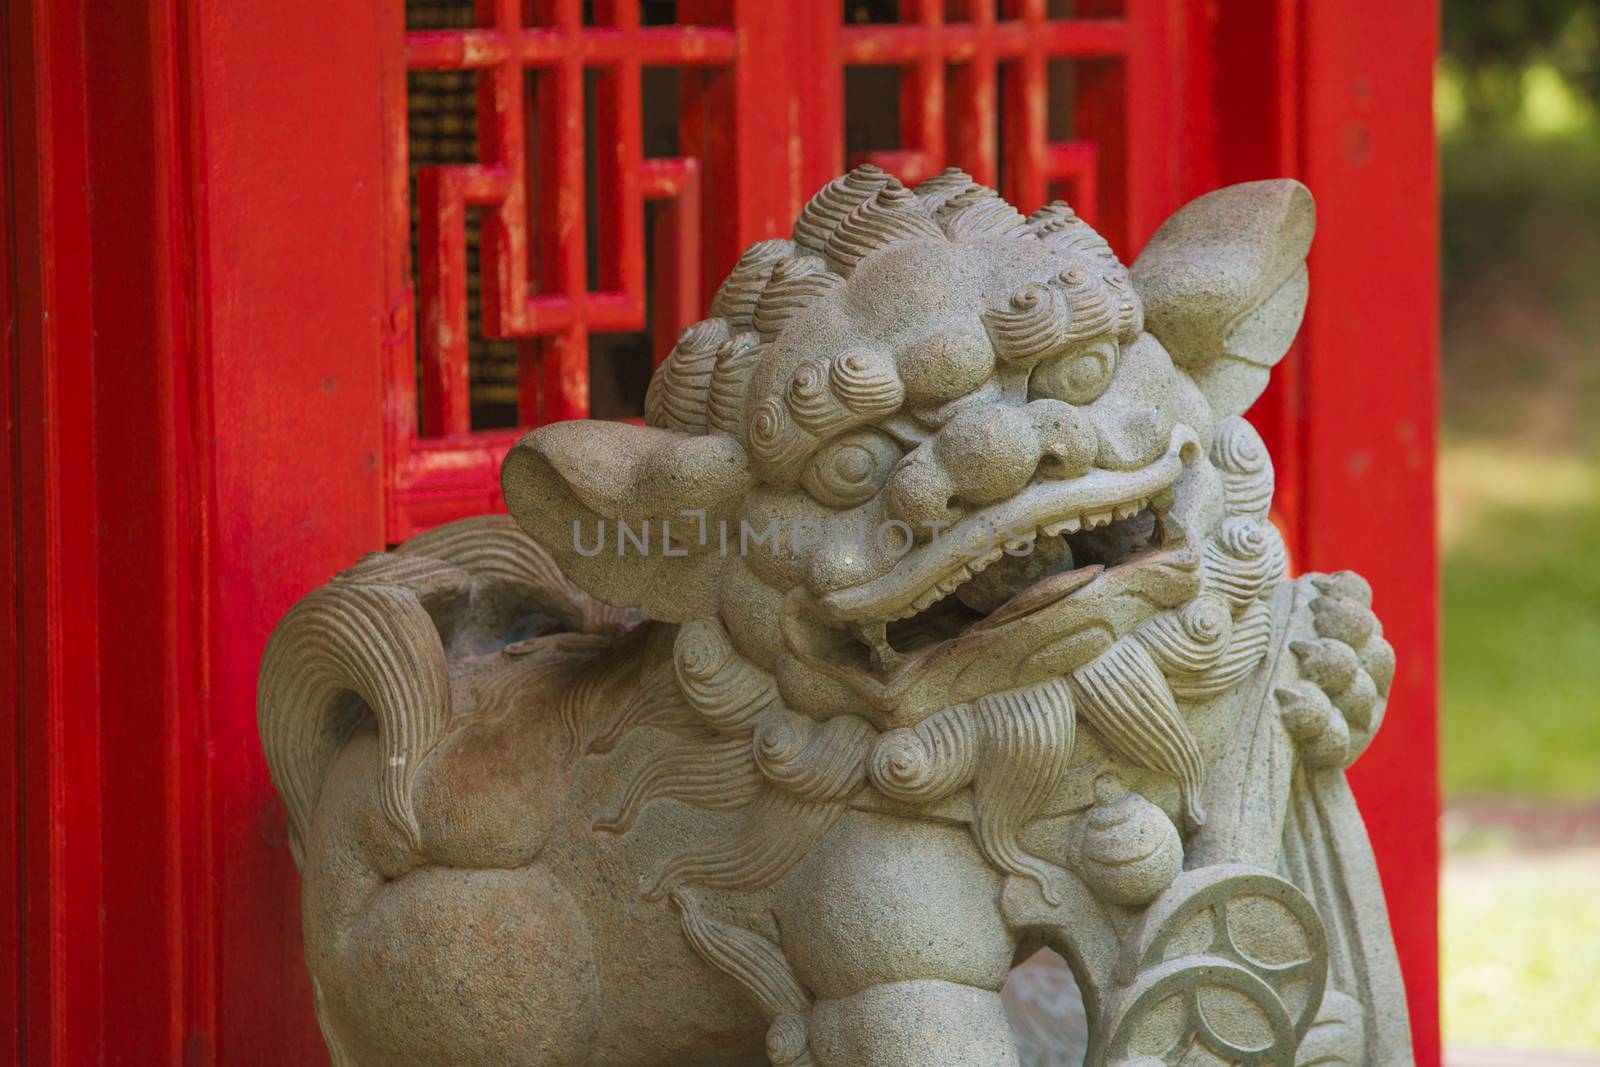 Chinese Guardian Lion by Creatista